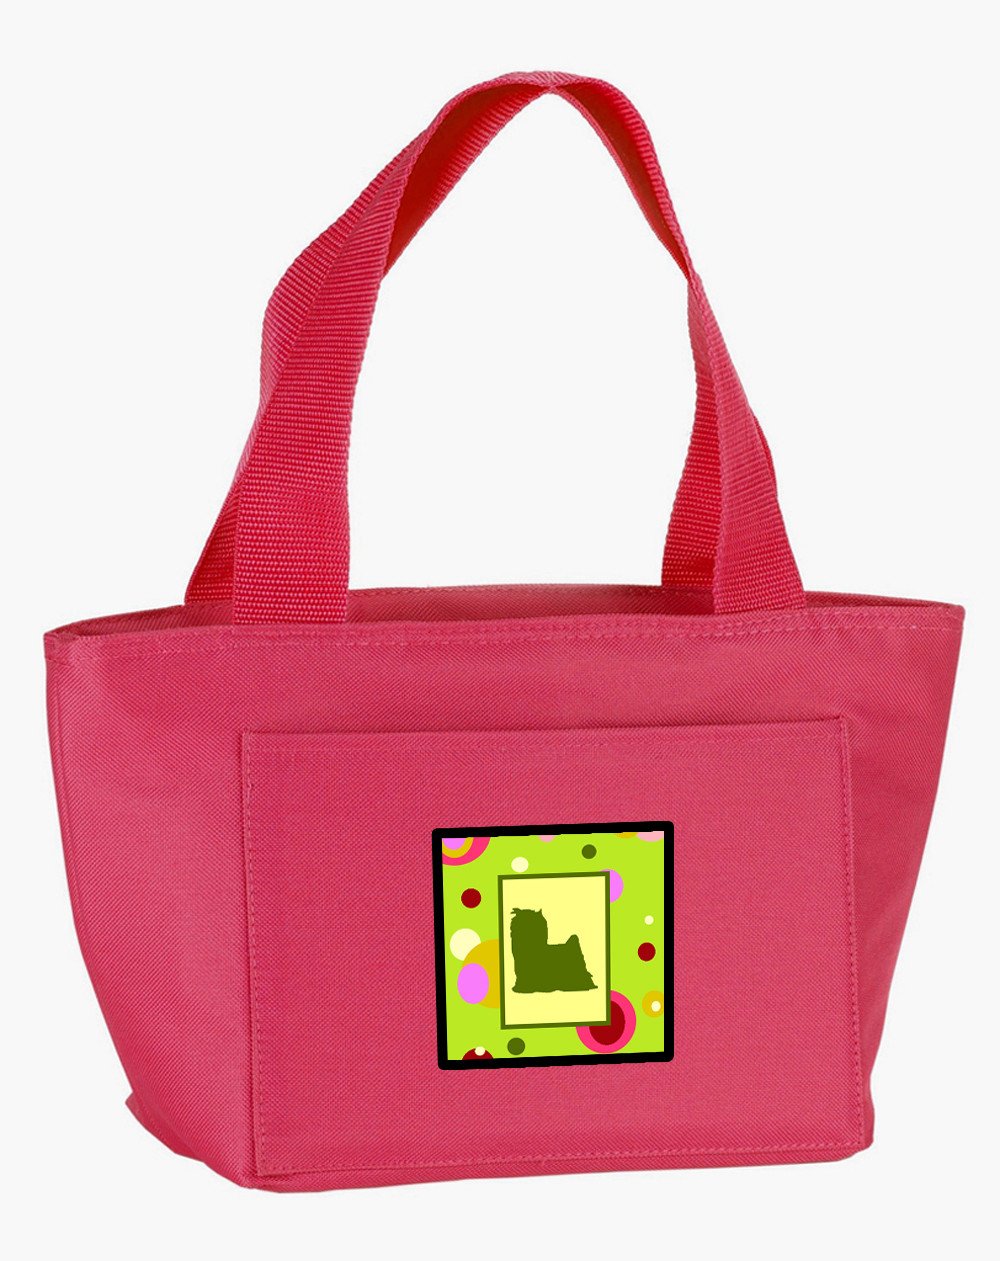 Lime Green Dots Yorkie Lunch Bag CK1084PK-8808 by Caroline's Treasures